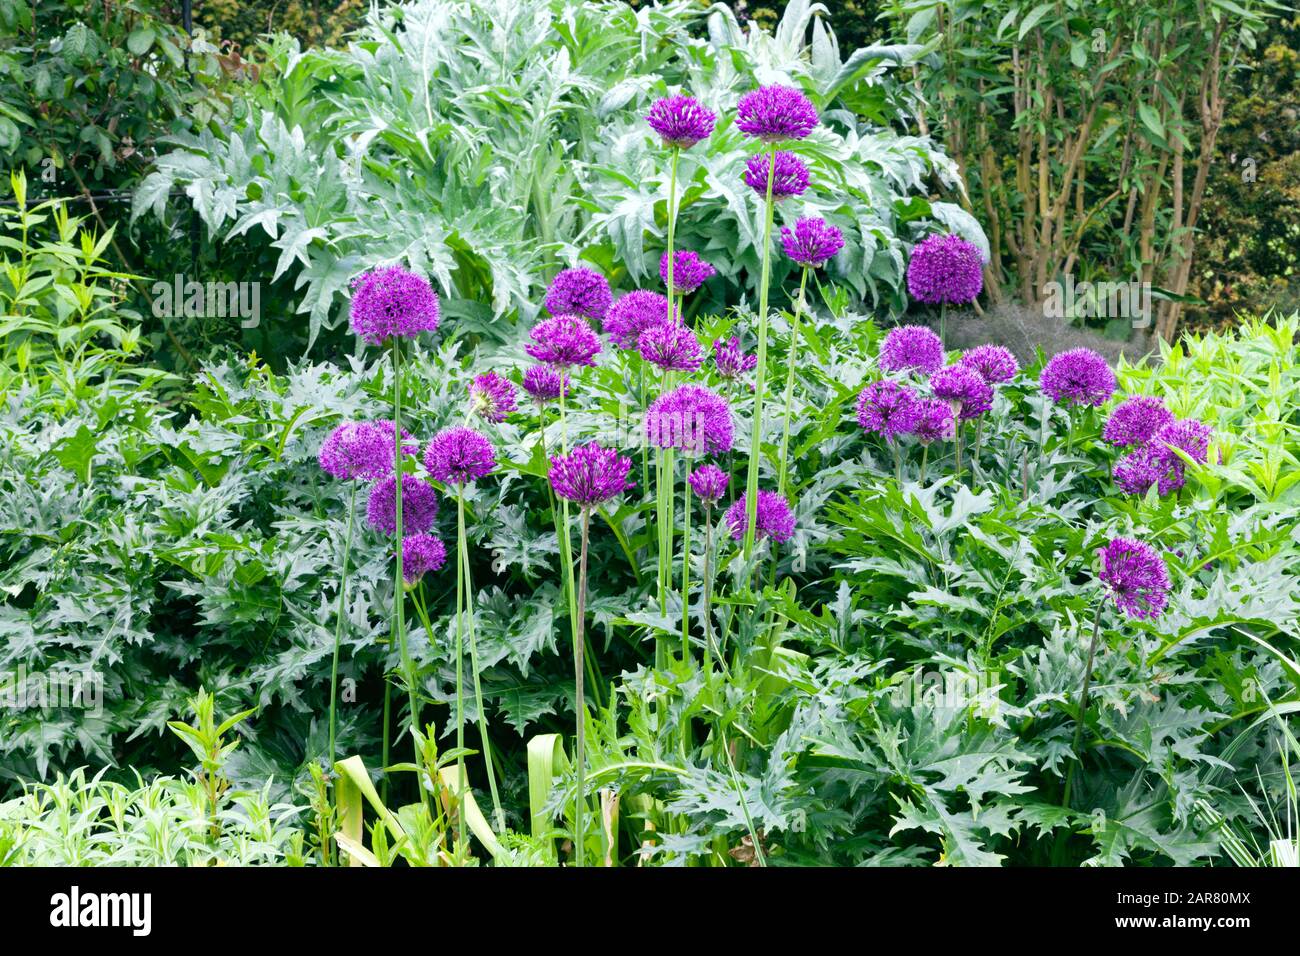 Purple allium flowers in bloom with global artichoke silver leaves and other green leafy plants in the background, in an English country garden . Stock Photo